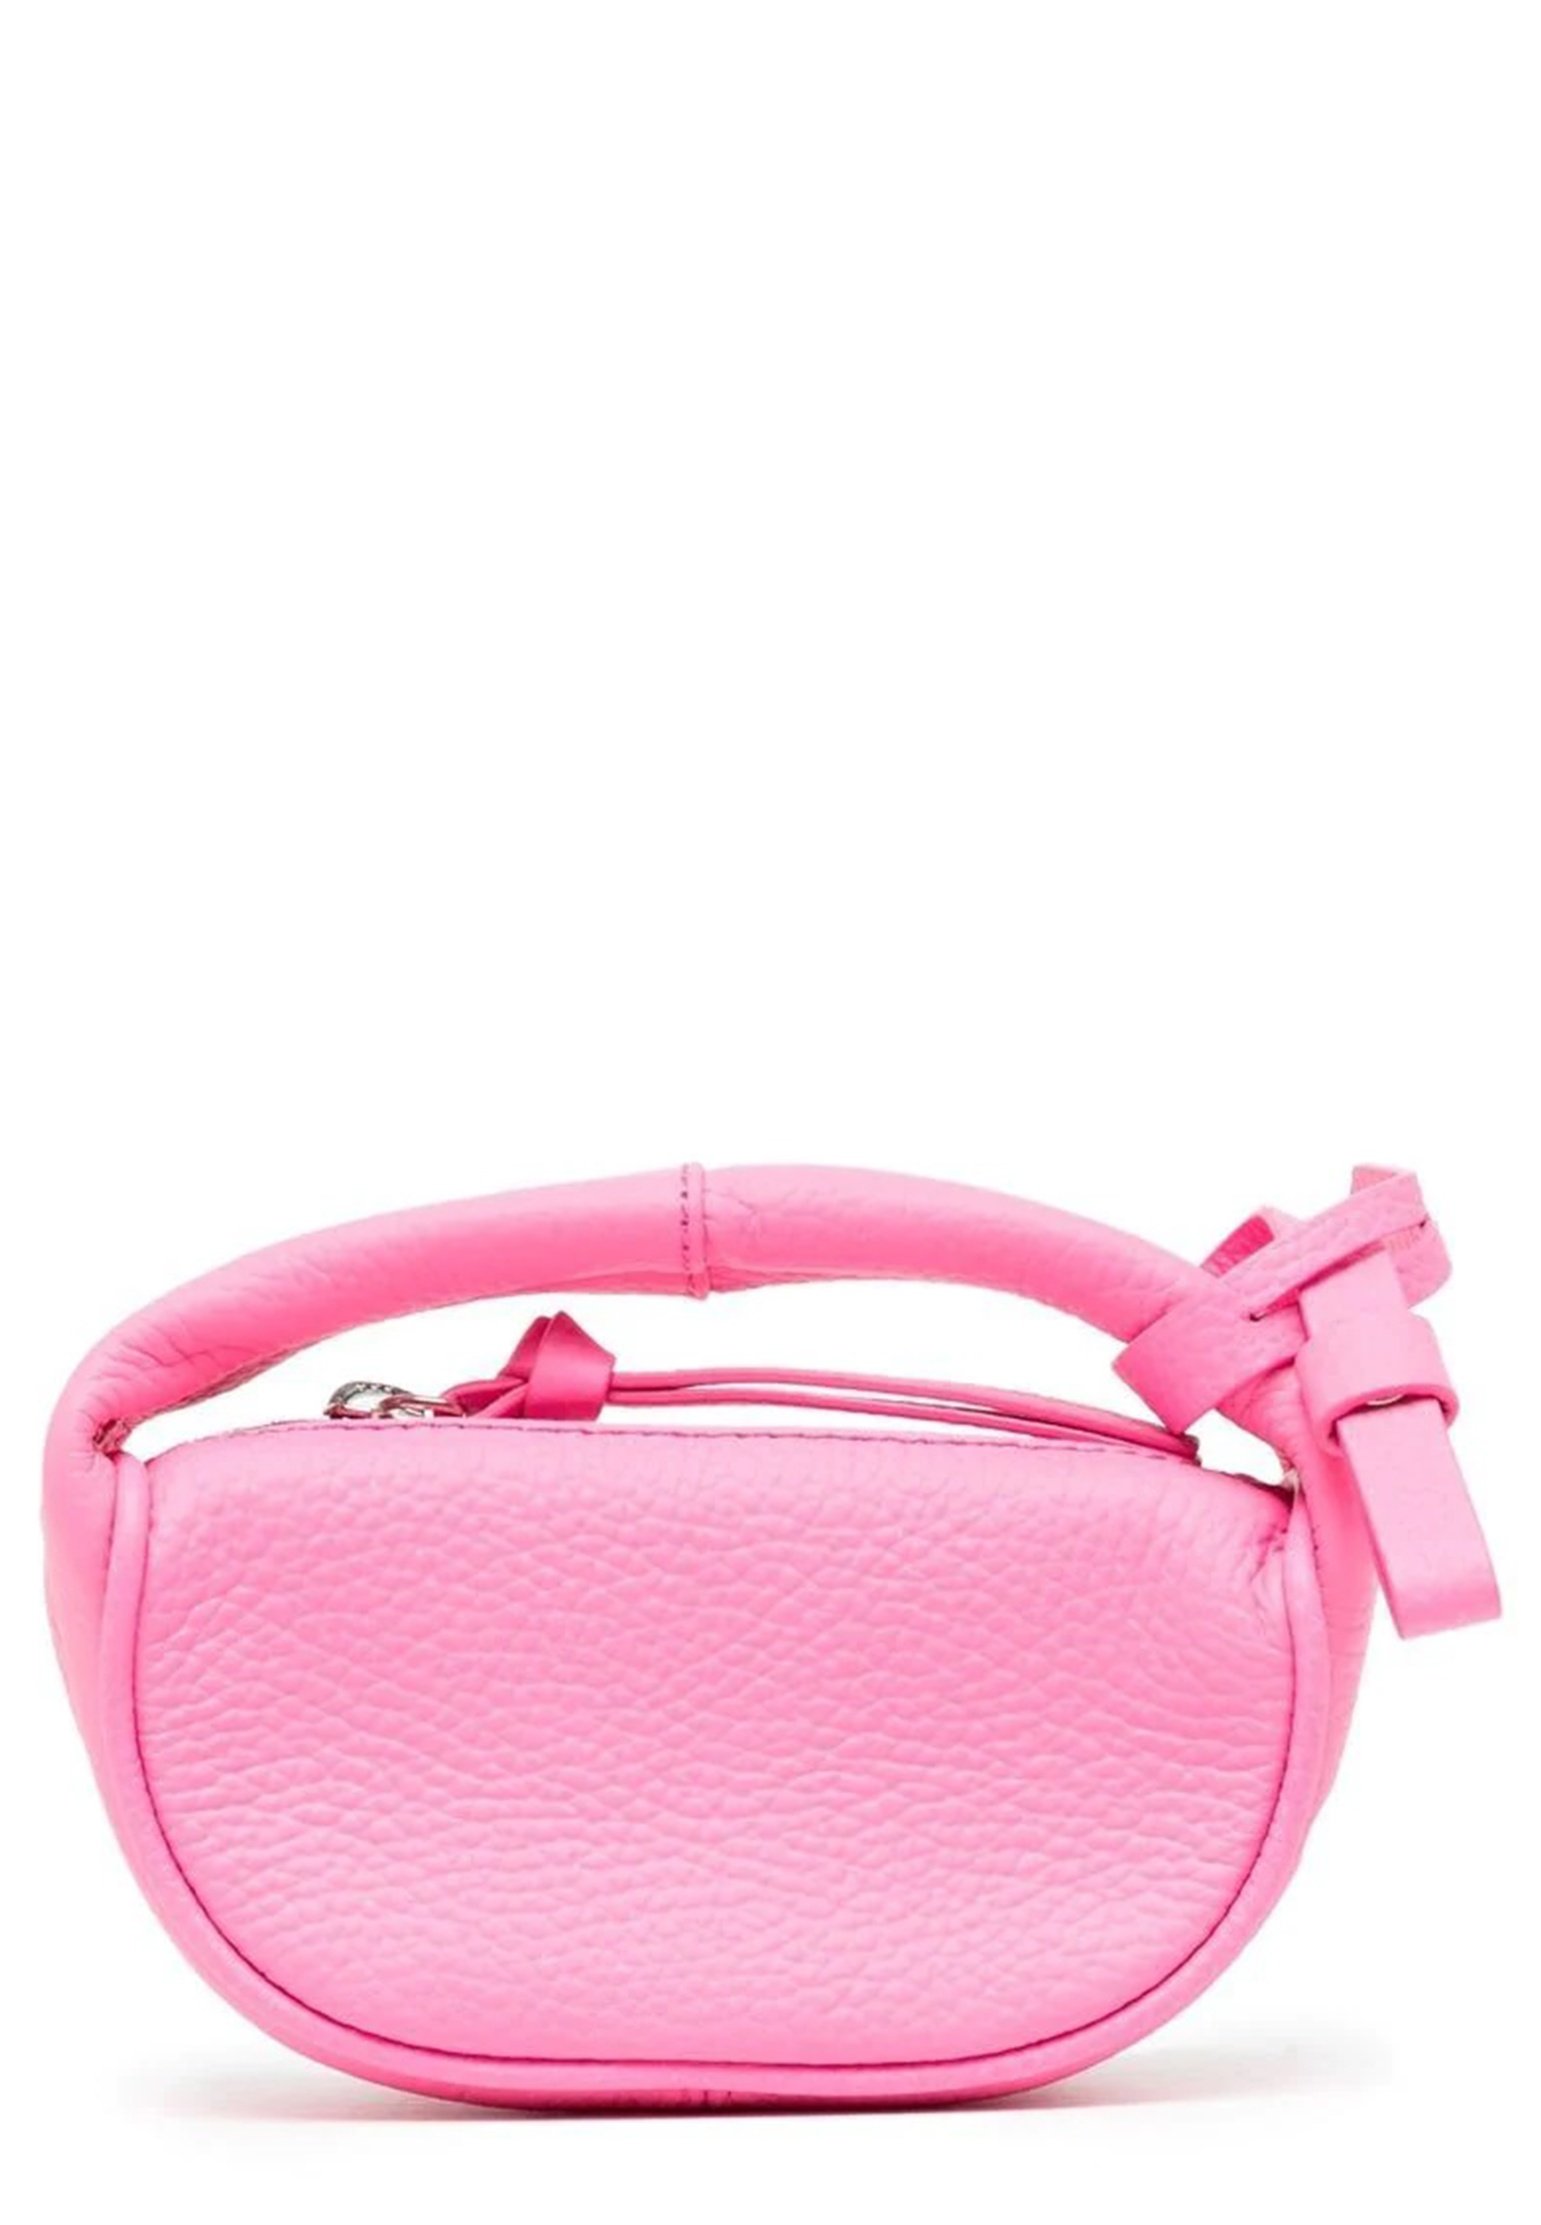 Bag BY FAR Color: pink (Code: 594) in online store Allure